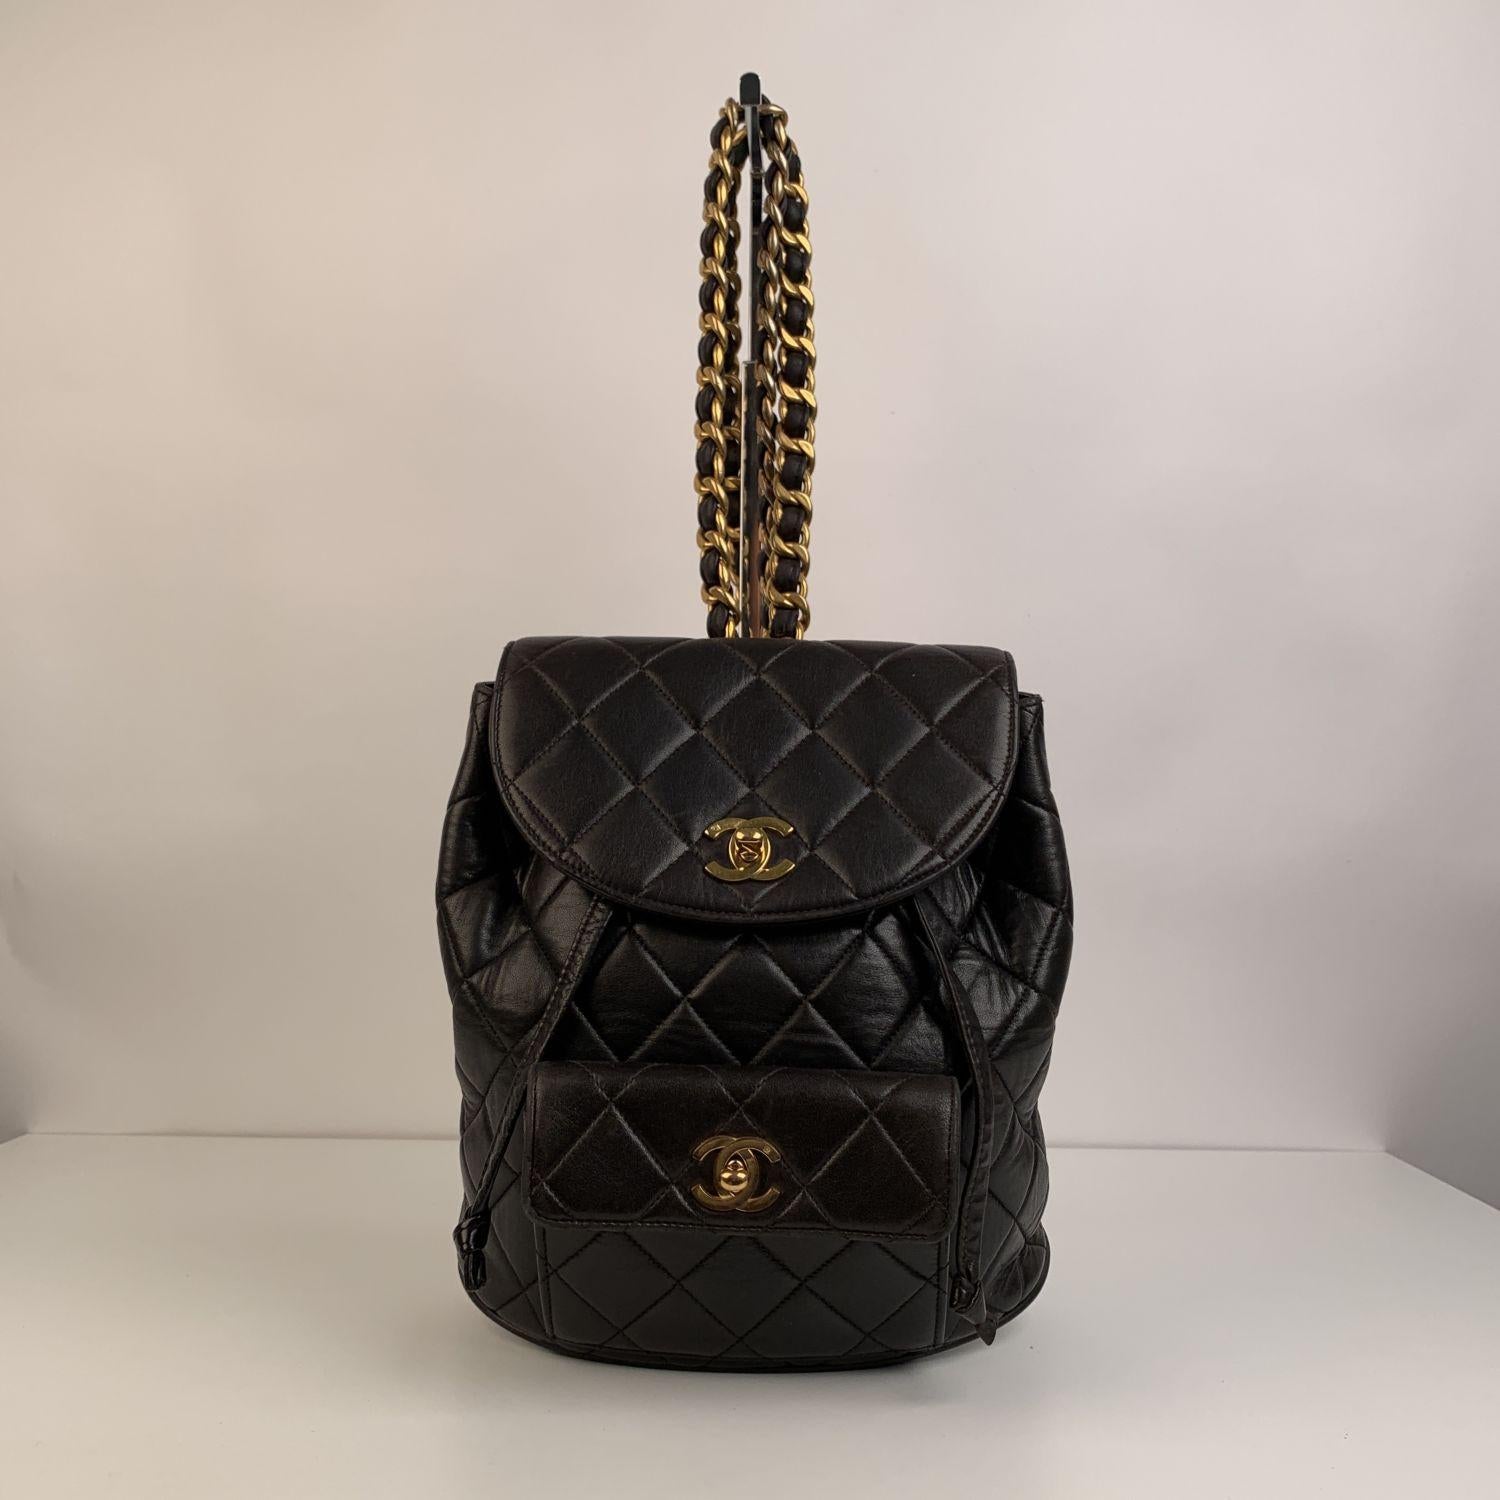 This bag will come with a Certificate of Authenticity provided by Entrupy, at no further cost.

Rare vintage Chanel backpack crafted in quilted black lambskin leather with gold-tone hardware. Iconic interwoven chain and leather adjustable shoulder